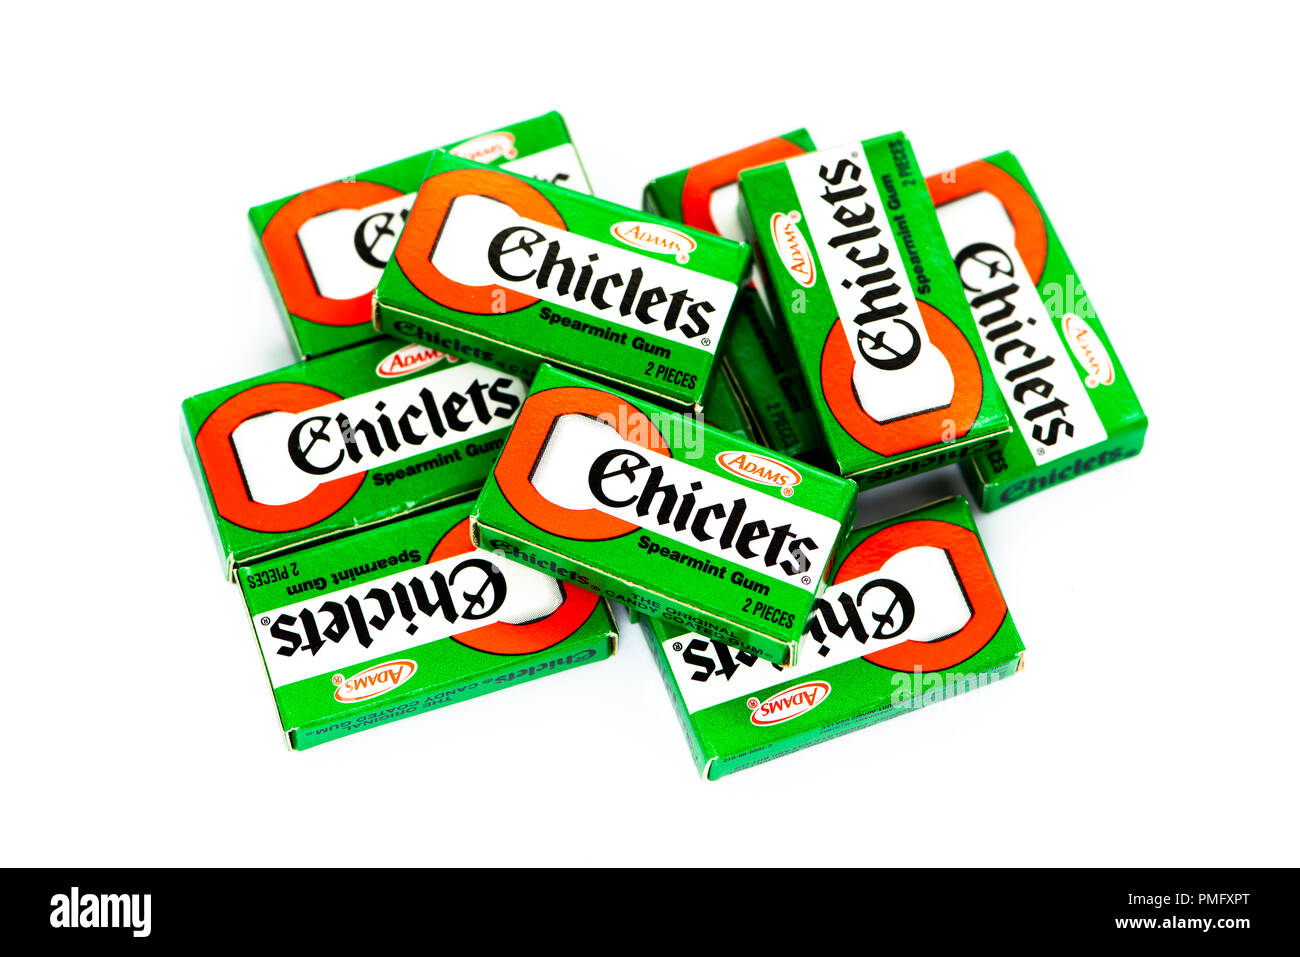 A pile of boxes of Adams Chiclets - a brand of candy coated spearmint flavored chewing gum, in individual boxes of 2 pieces. Stock Photo